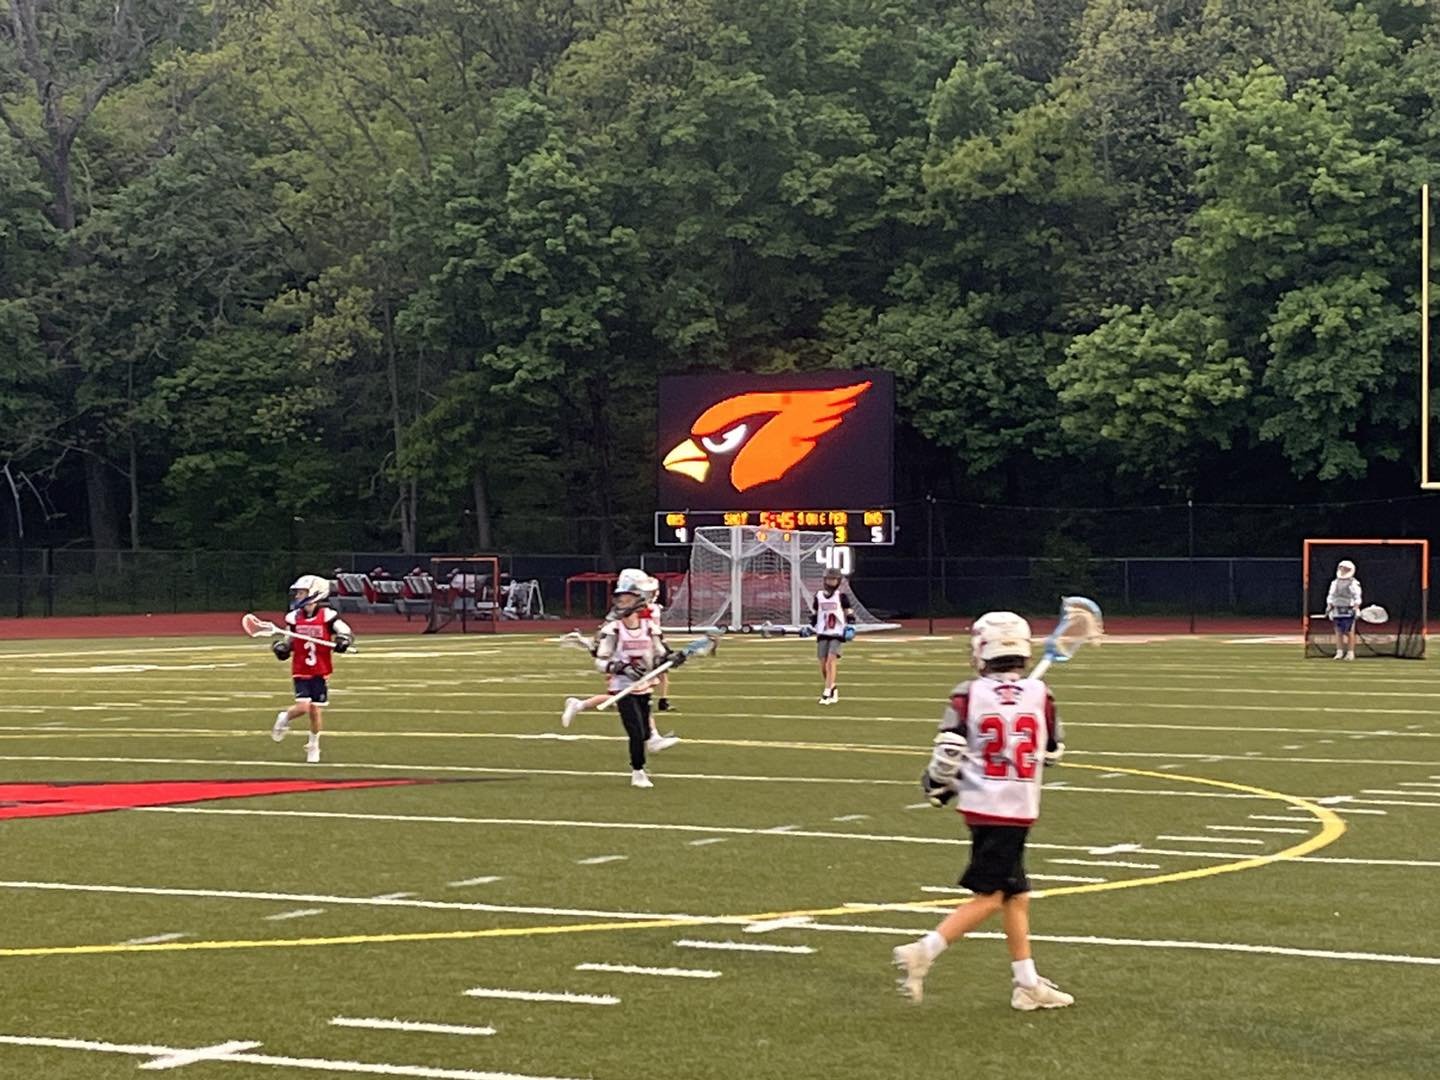 Half time at tonight&rsquo;s GHS/Darien game featured GYL 4 Red vs 4 White - it won&rsquo;t be long until these boys will be high school superstars! 🤩🥍